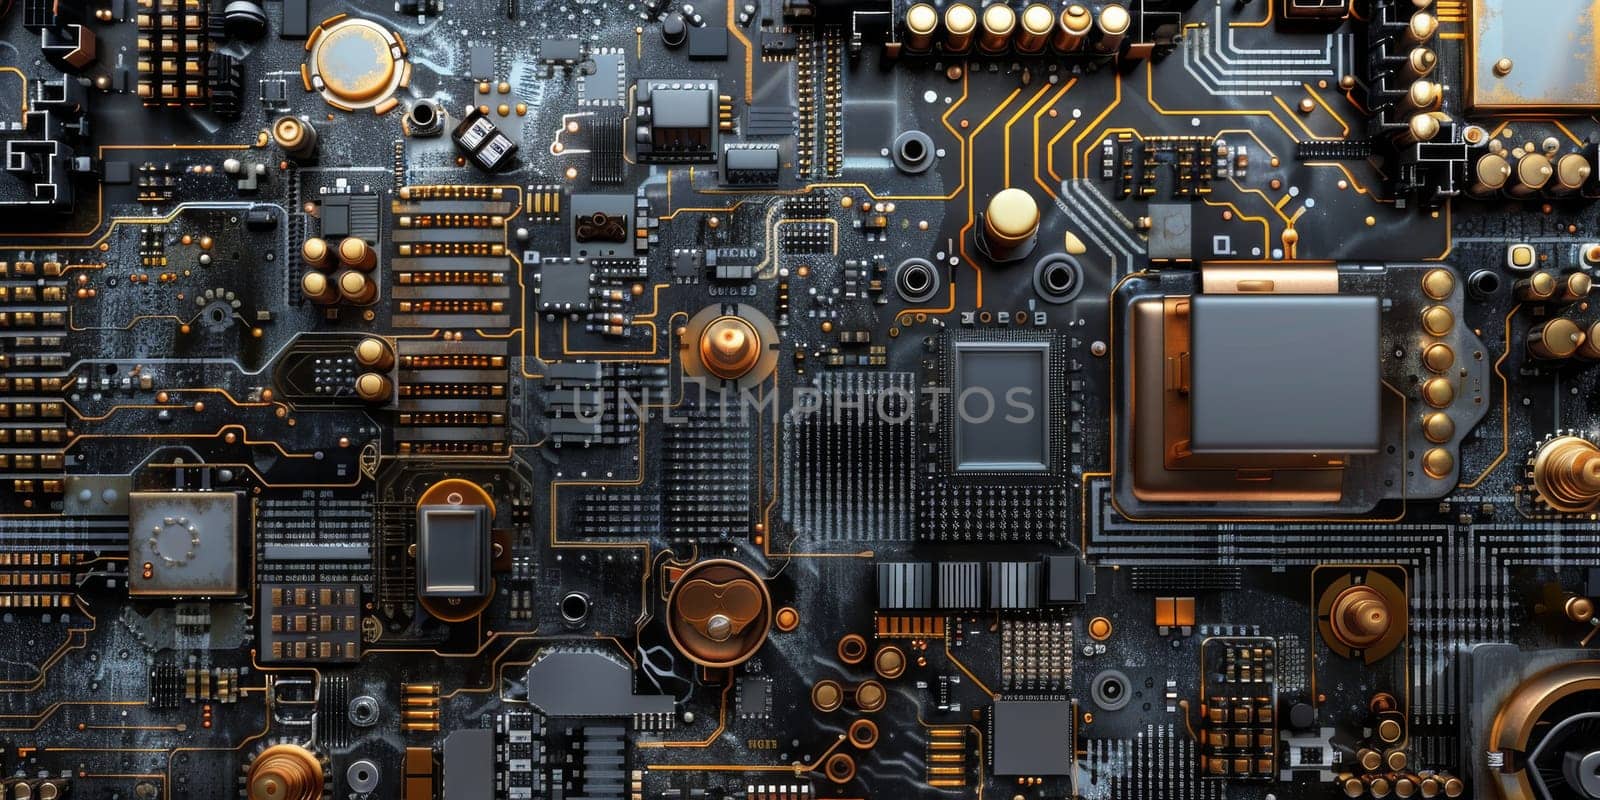 Circuitry of electronic components, highlighting the metallic surfaces and micro-scale details of a computer chips